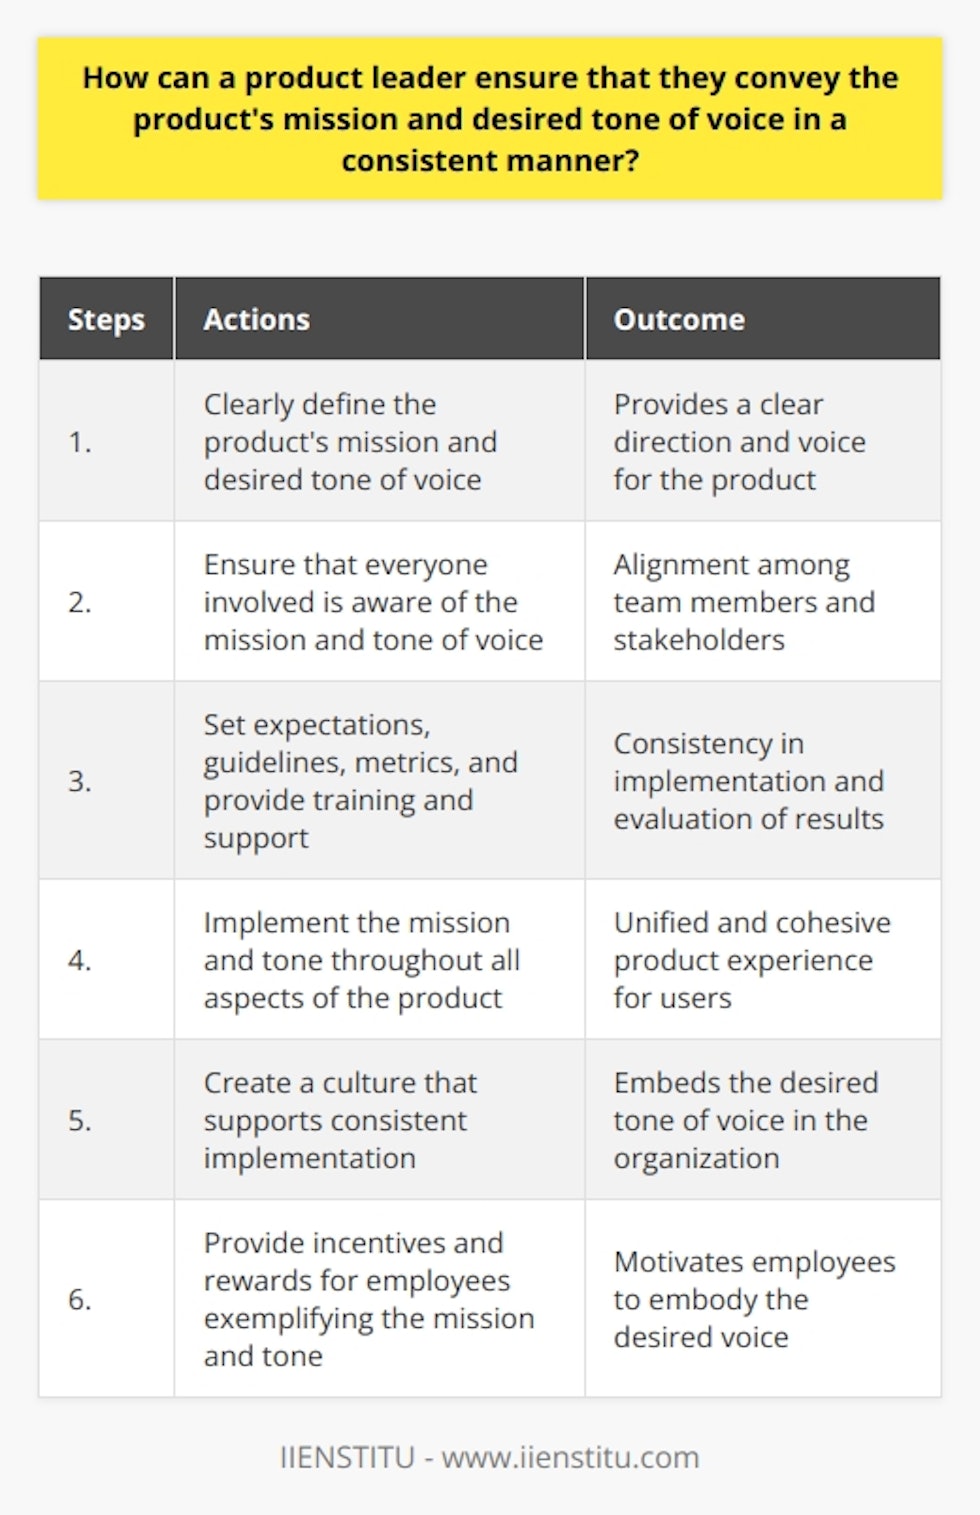 To summarize, product leaders can ensure that they convey the product's mission and desired tone of voice in a consistent manner by: 1. Clearly defining the product's mission and desired tone of voice2. Ensuring that everyone involved in the product is aware of the mission and tone of voice3. Setting expectations and guidelines, establishing metrics to measure success, and providing ongoing training and support4. Implementing the mission and tone of voice consistently throughout all aspects of the product, including design, promotion, and customer interactions5. Creating a culture that supports the consistent implementation of the product's mission and tone of voice6. Providing incentives and rewards for employees who exemplify the product's mission and tone. By following these steps, product leaders can effectively convey their product's mission and desired tone of voice, ultimately leading to a successful product.